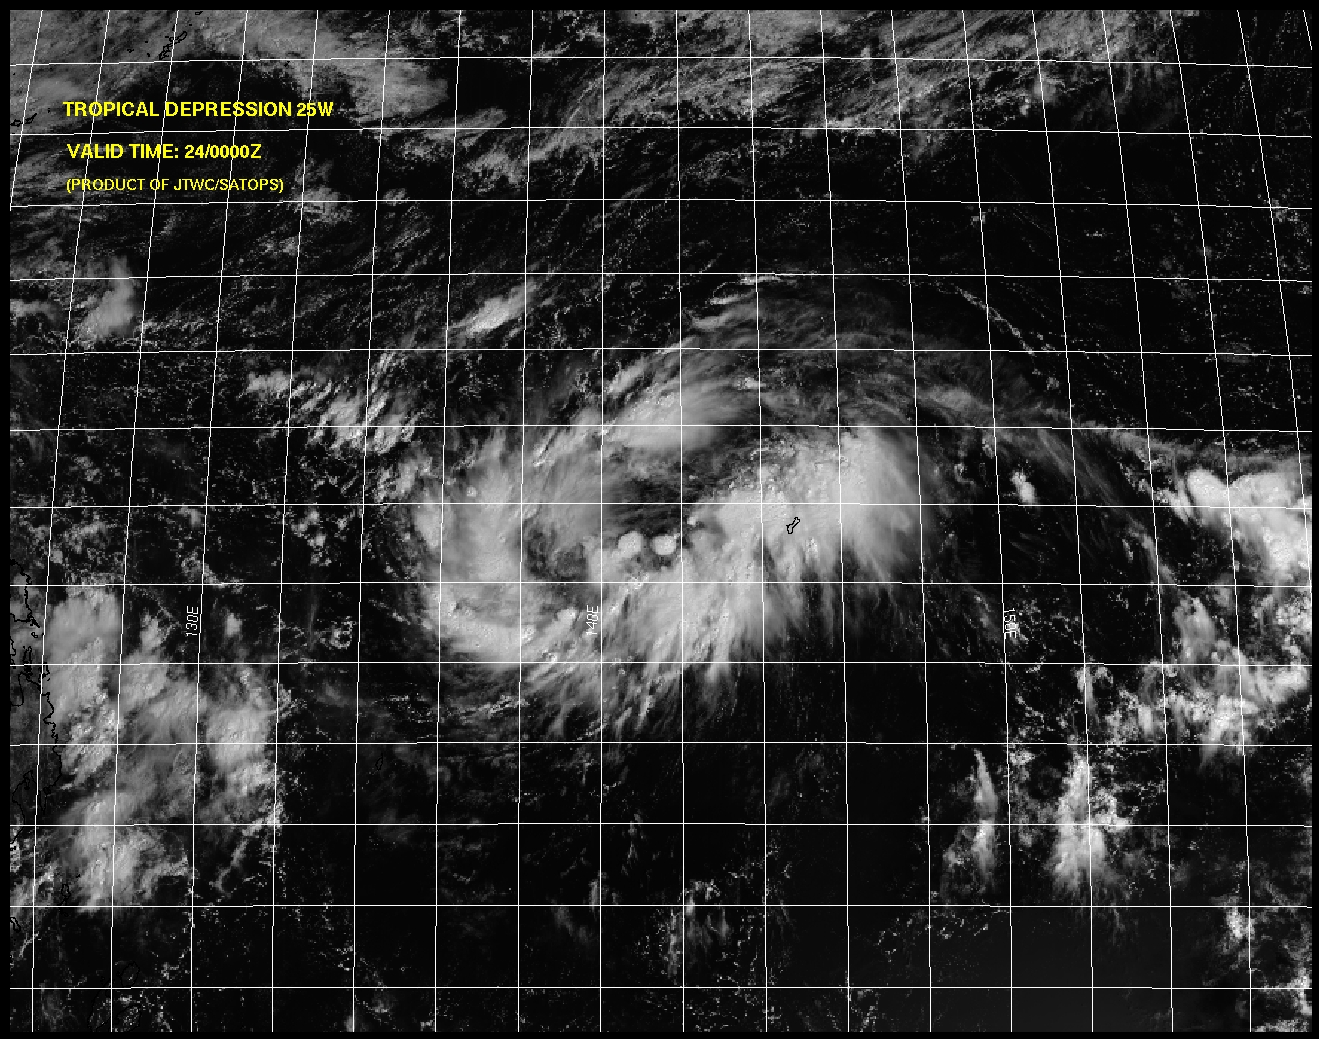 SATELLITE ANALYSIS, INITIAL POSITION AND INTENSITY DISCUSSION: ANIMATED MULTISPECTRAL SATELLITE IMAGERY (MSI) DEPICTS DEEP CONVECTION WRAPPING INTO A LOW LEVEL CIRCULATION CENTER (LLCC) WEST OF GUAM. A TIMELY 240004Z ASCAT METOP-B PASS INDICATES A MODEST REGION WITH MOSTLY 20 KNOT WINDS NEAR THE LLCC. OVERALL, THERE IS MODERATE CONFIDENCE IN THE INITIAL POSITION AND INTENSITY BASED ON THE MSI, ASCAT IMAGE, AND MULTIPLE AGENCY DVORAK ESTIMATES FIXES OF 30 KNOTS FROM PGTW, RJTD. ENVIRONMENTAL CONDITIONS REMAIN FAVORABLE WITH MODERATE RADIAL OUTFLOW, LOW VERTICAL WIND SHEAR AND WARM (29-30C) SEA SURFACE TEMPERATURES (SST).